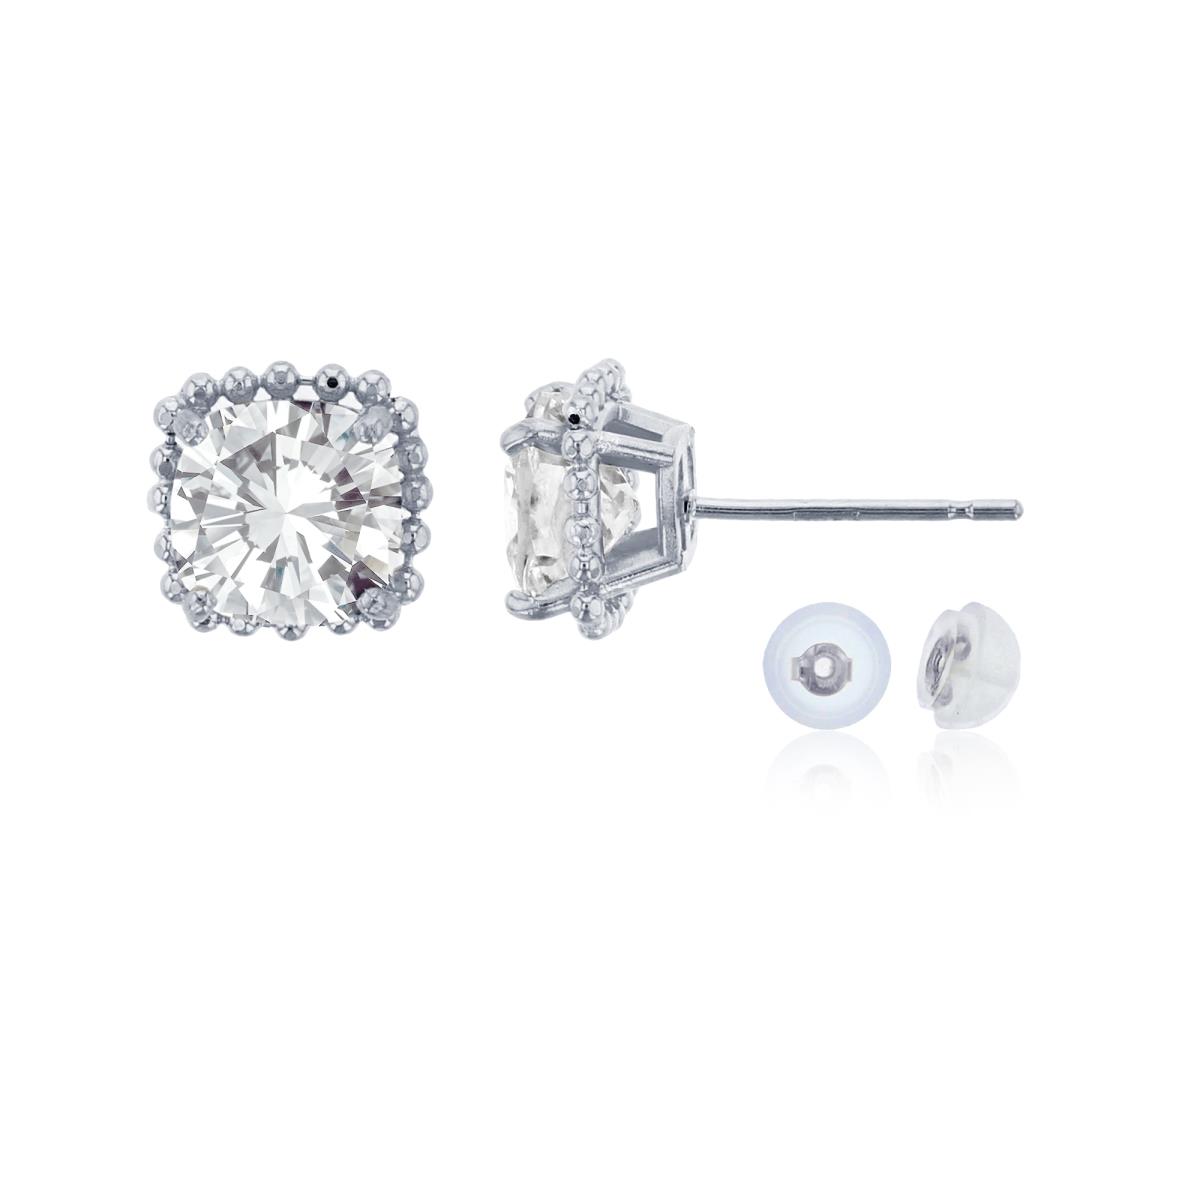 10K White Gold 6x6mm Cushion Cut White Topaz Bead Frame Stud Earring with Silicone Back